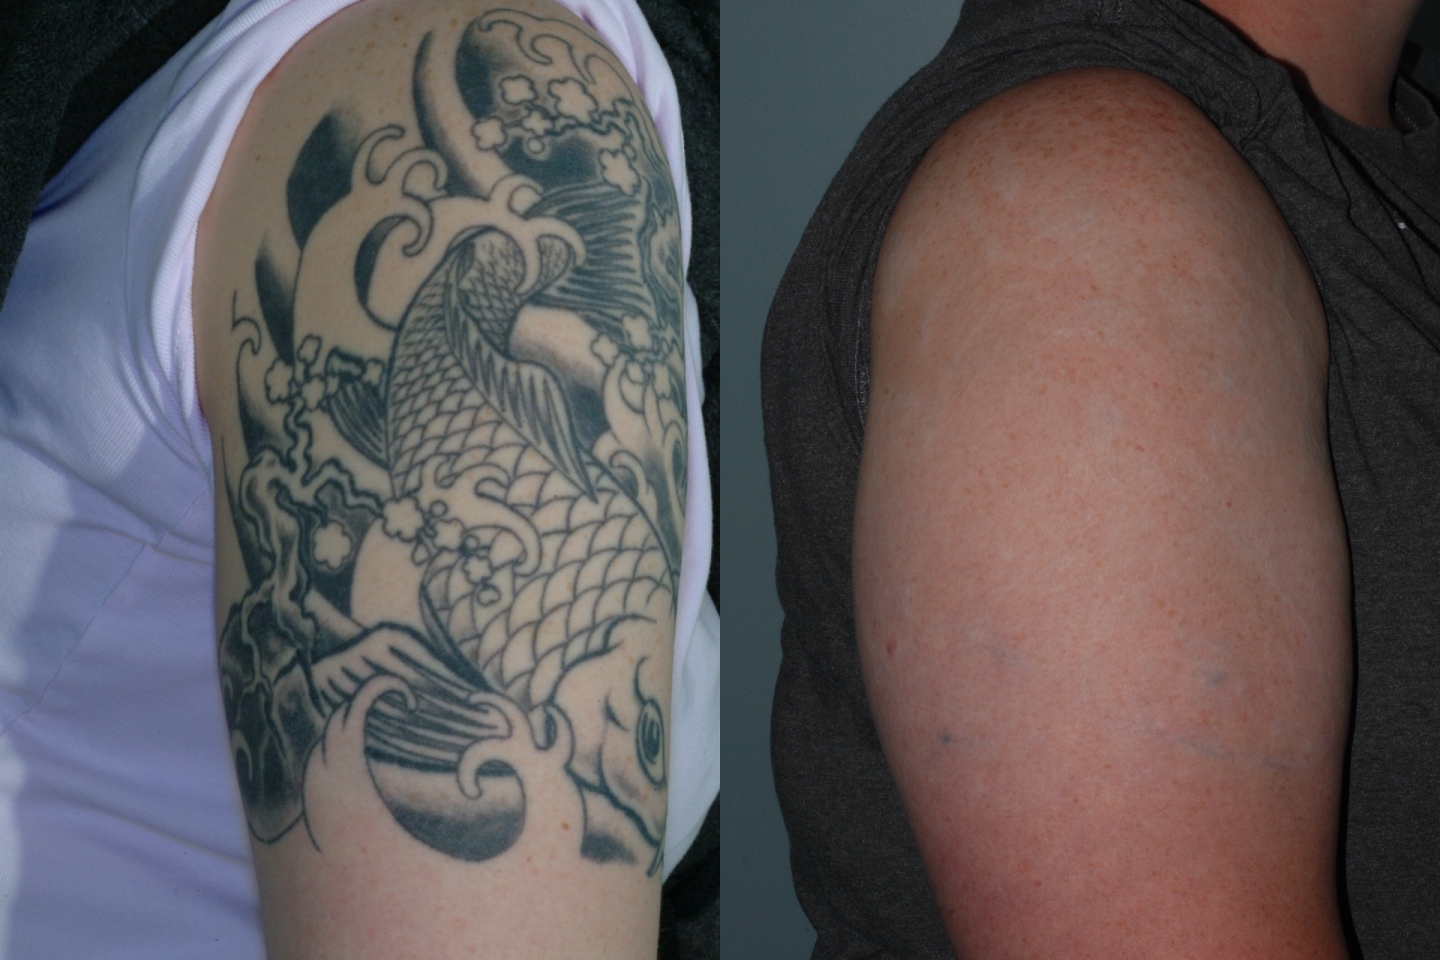 Laser tattoo removal.  6 Tattoo removal lasers including PicoSure and Prima Pico lasers.